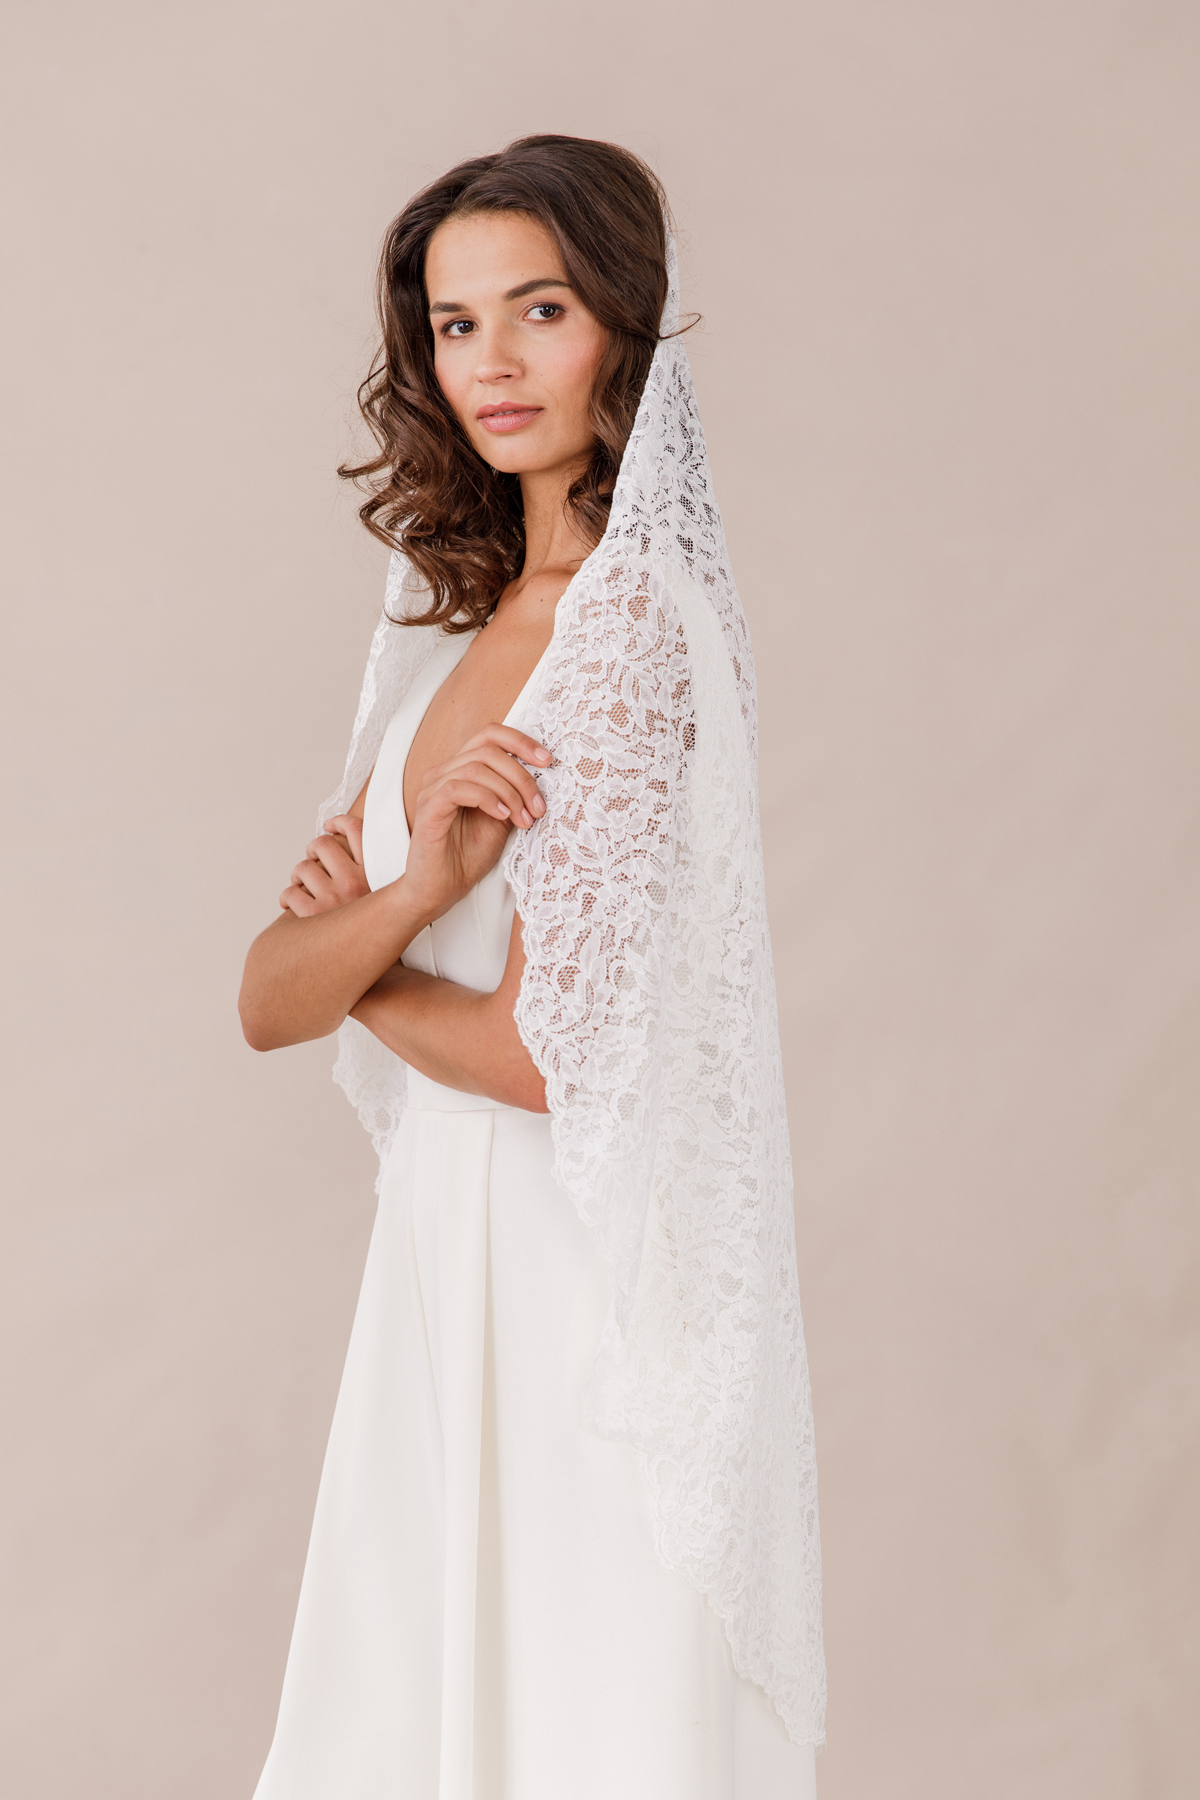 Jana - lace veil with millie lace edging